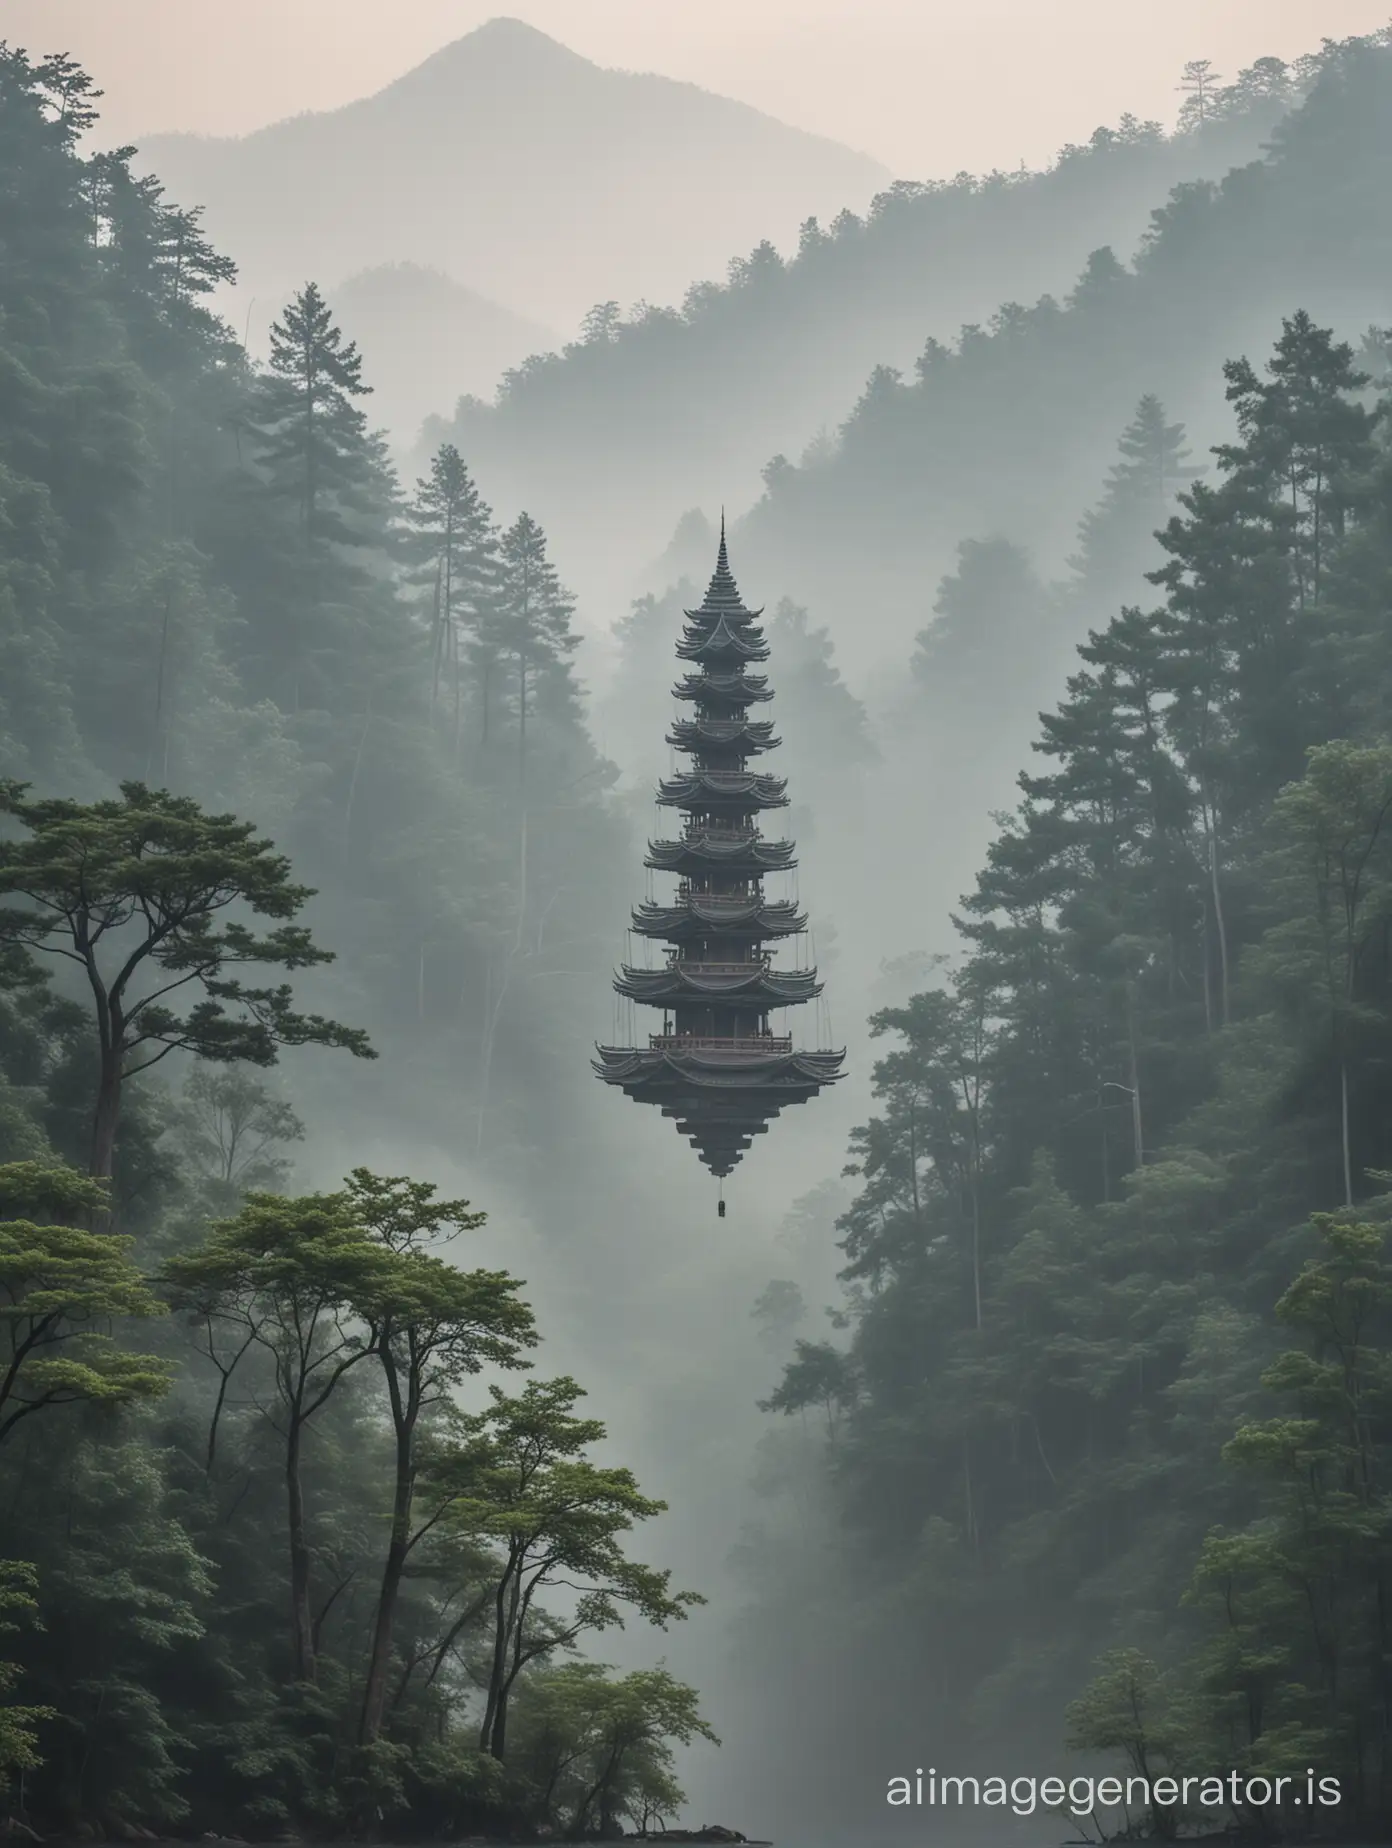 A pagoda in anti-gravity floating above the forest in the sky in a smoggy morning. All around mountains in the horizon.